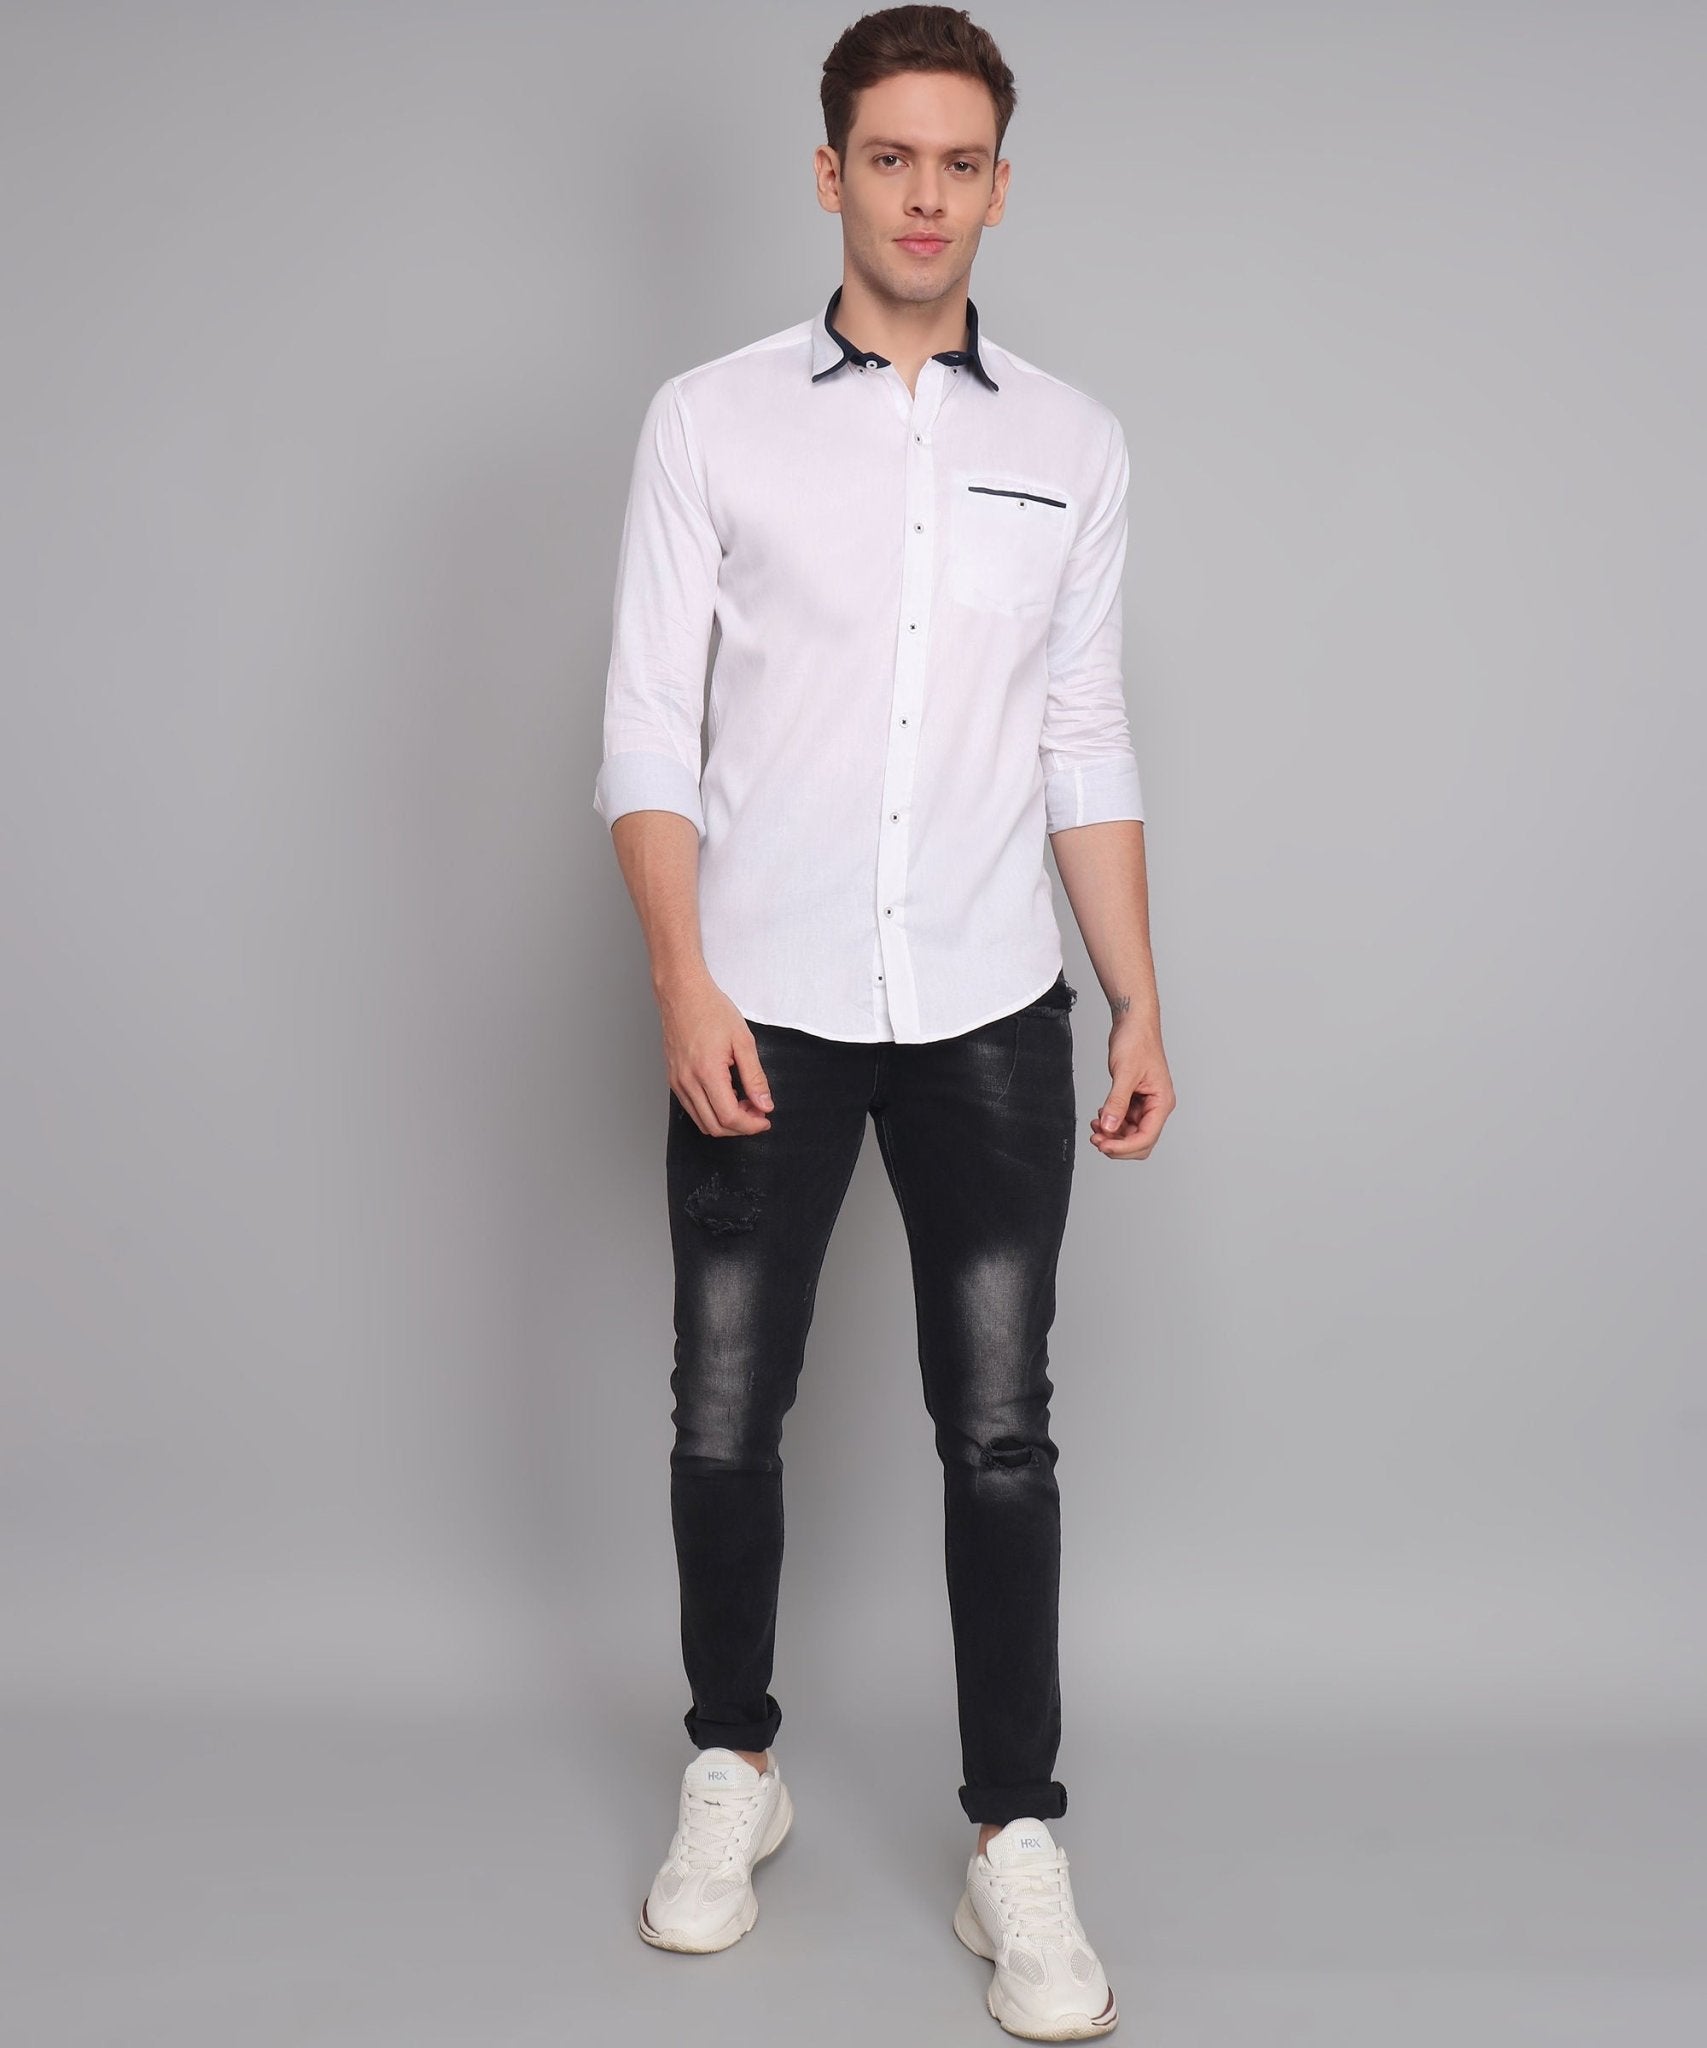 TryBuy Premium Fashionable Cotton Casual White Shirt for Men - TryBuy® USA🇺🇸